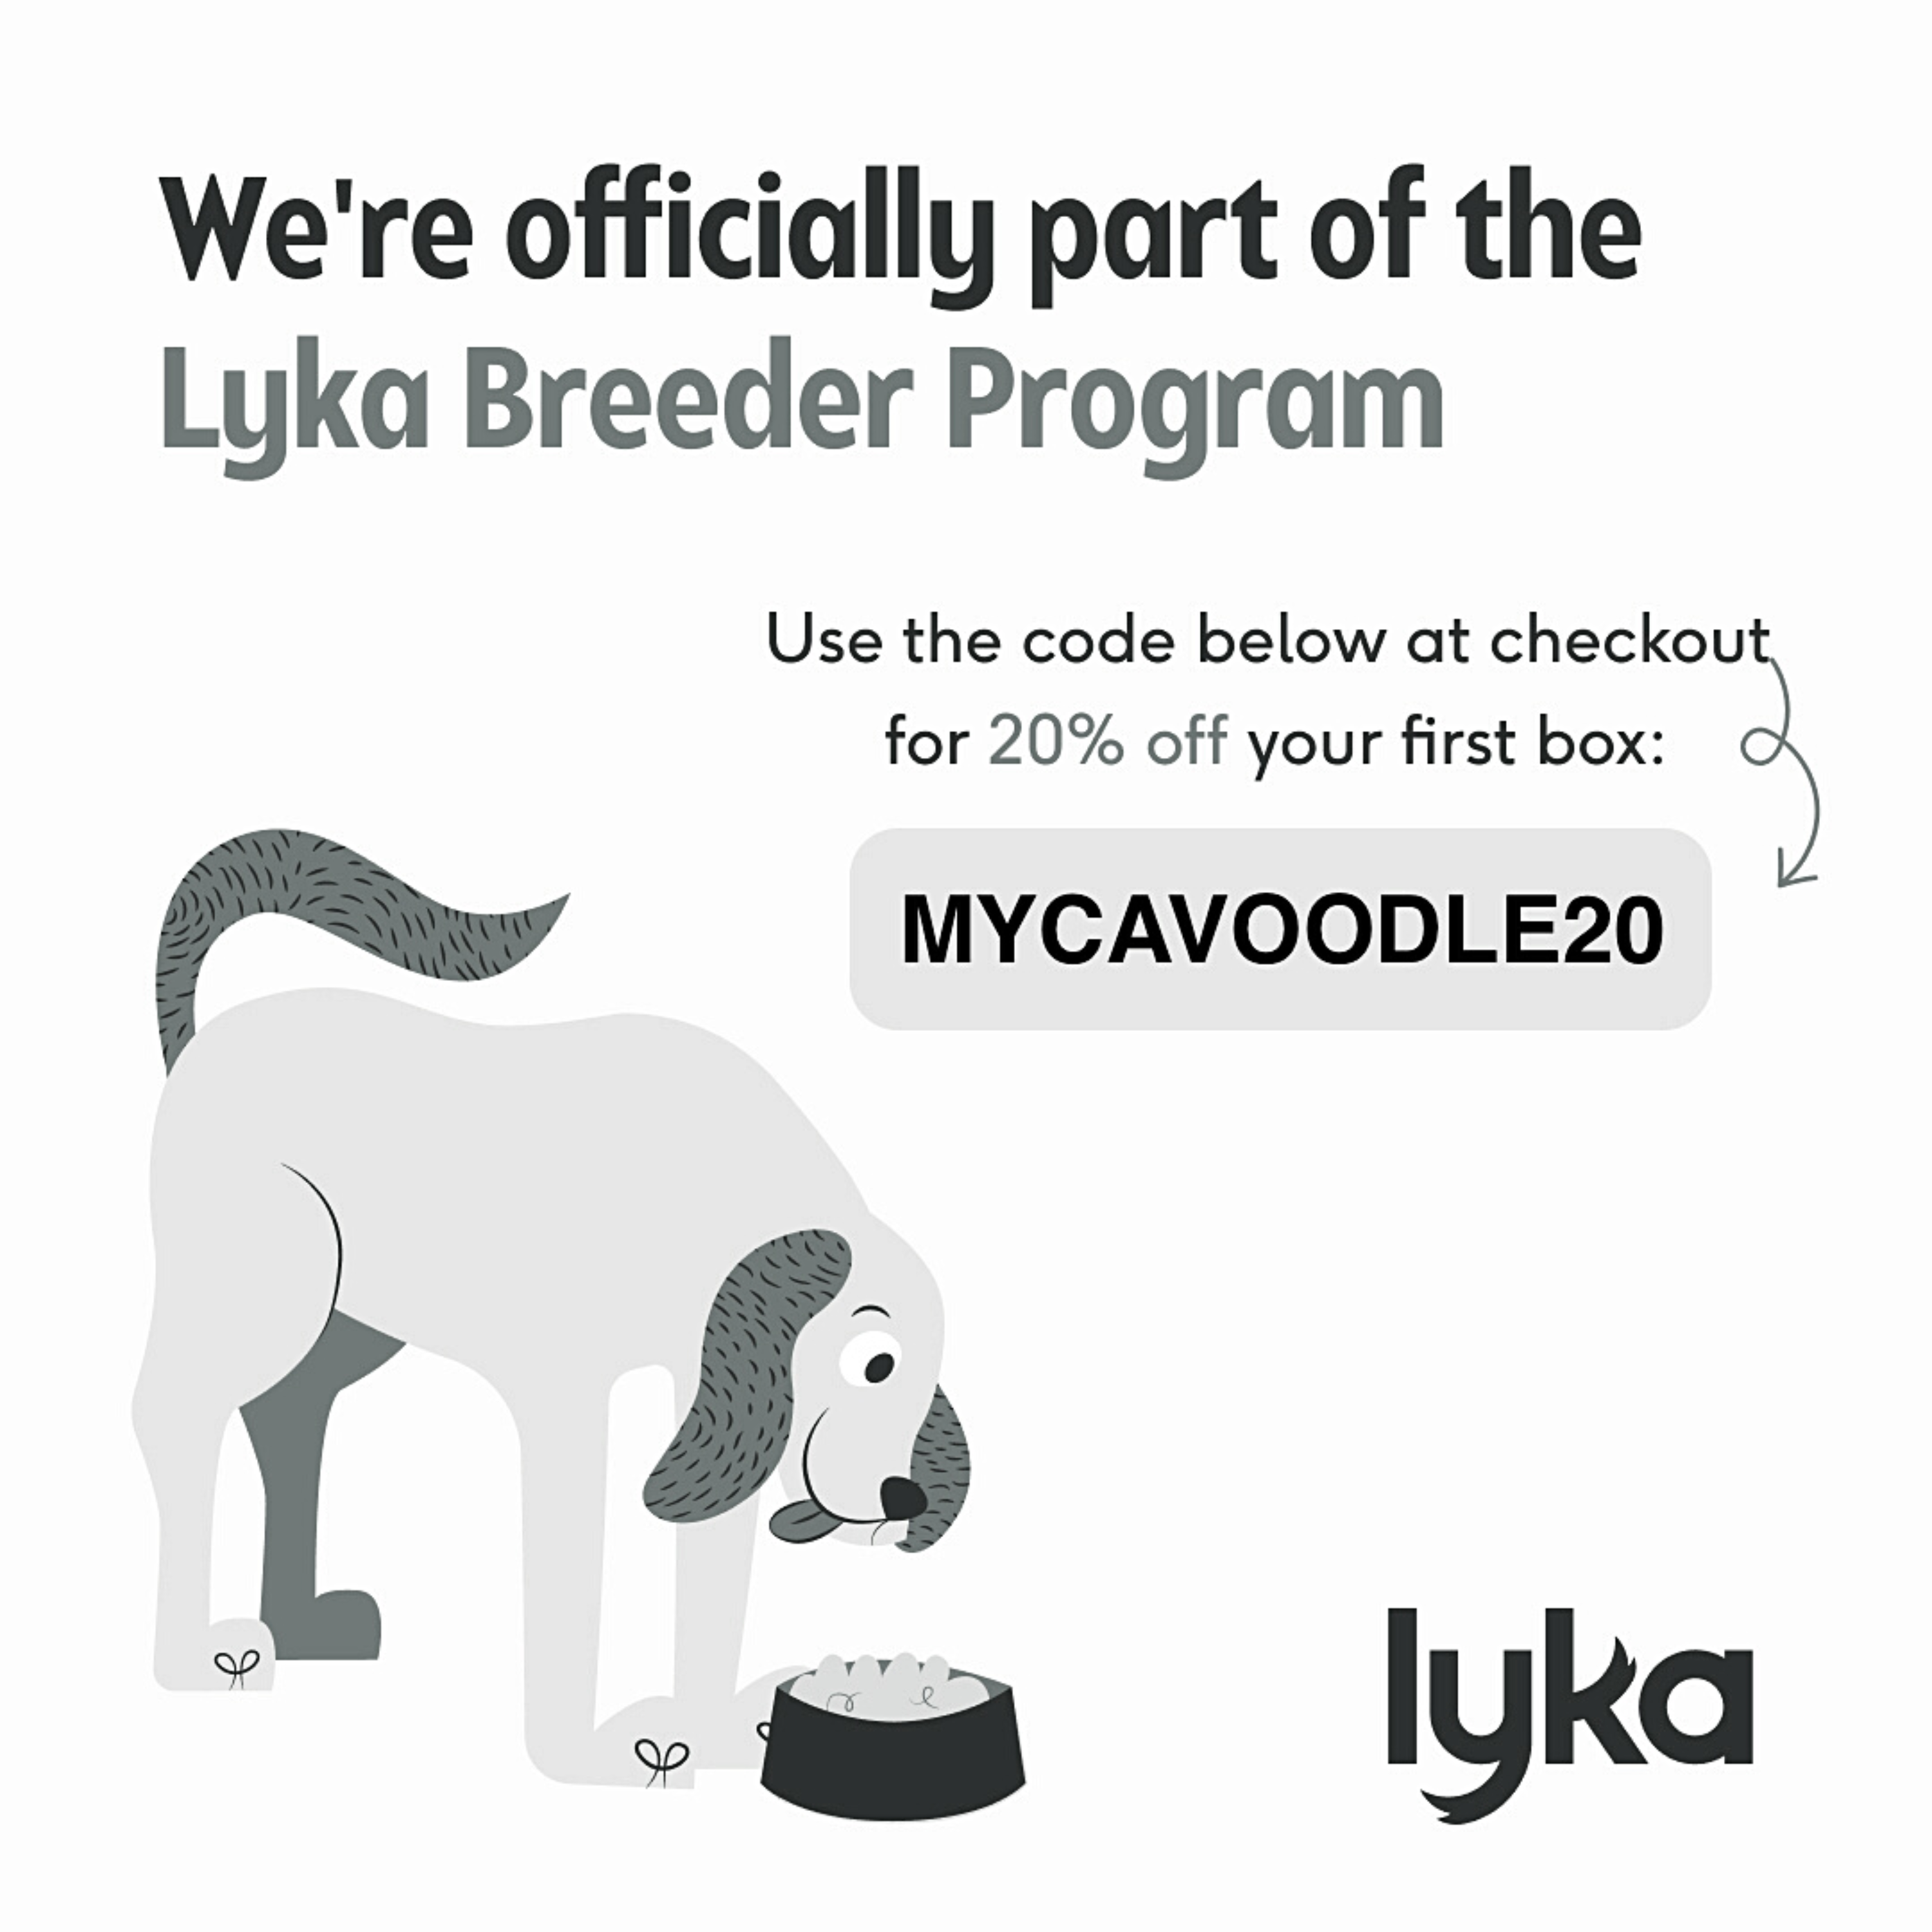 Is Lyka a good option for my cavoodle?